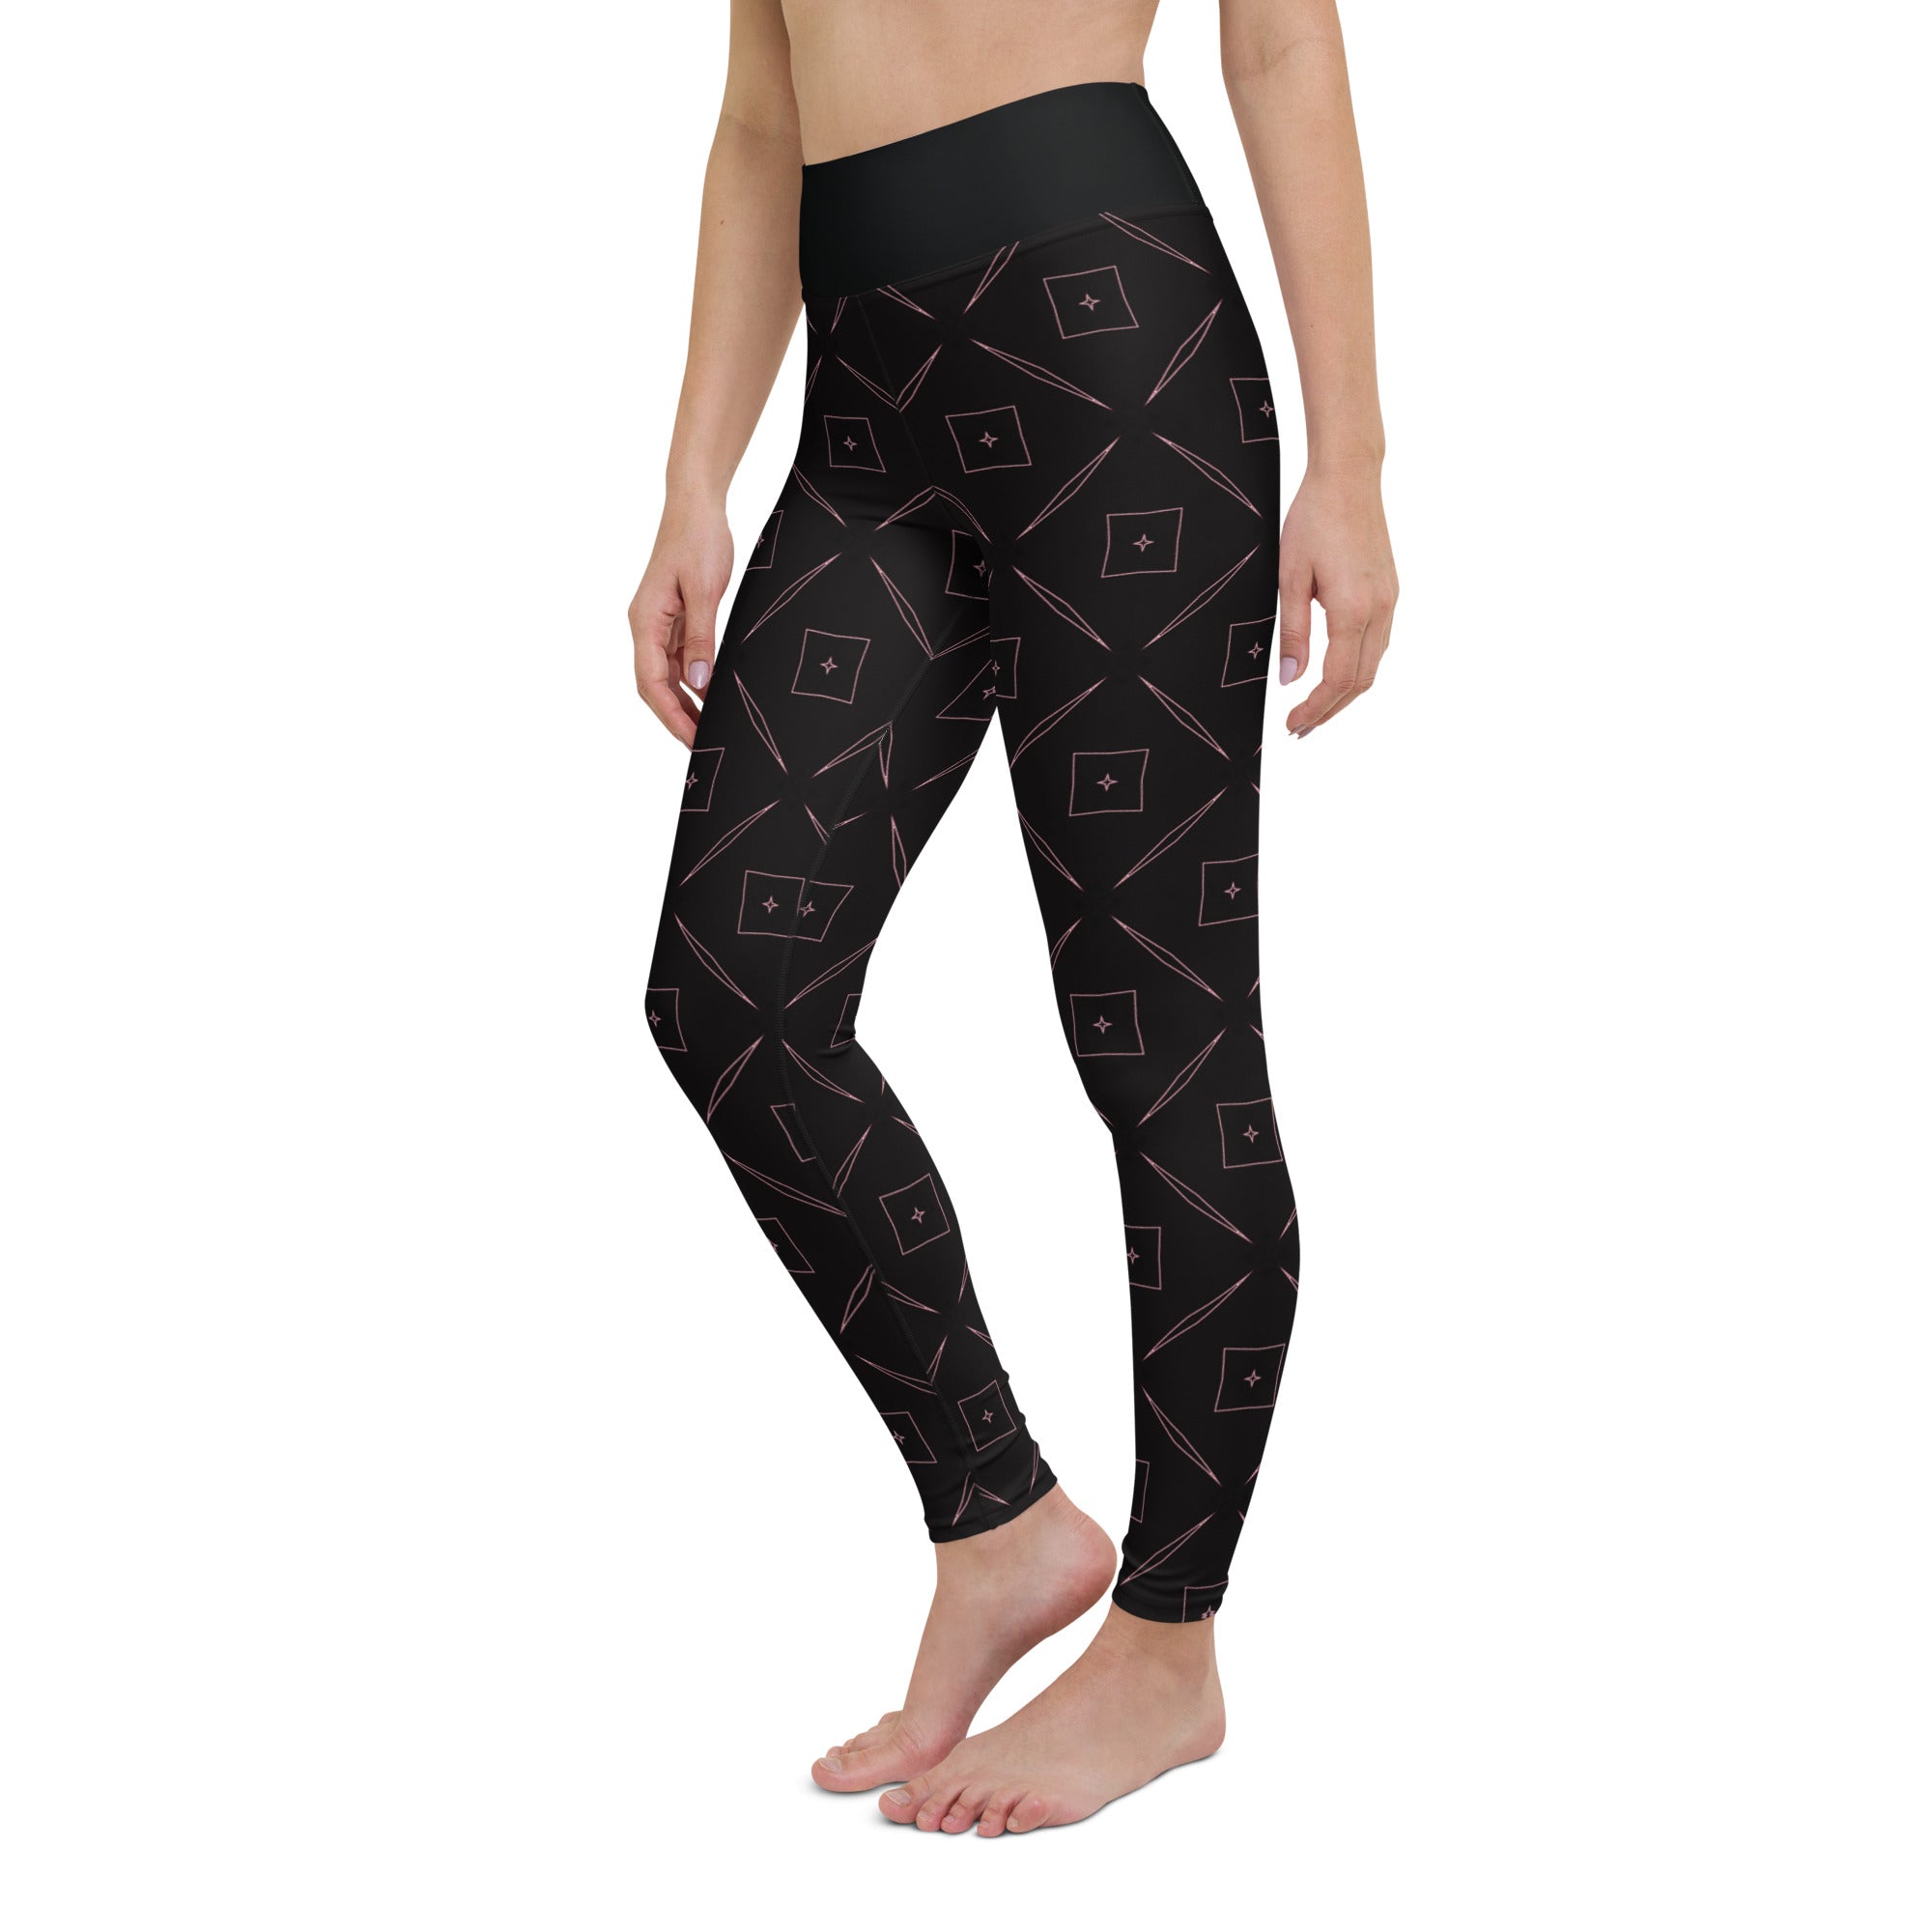 Feathered Serenity All-Over Print Yoga Leggings